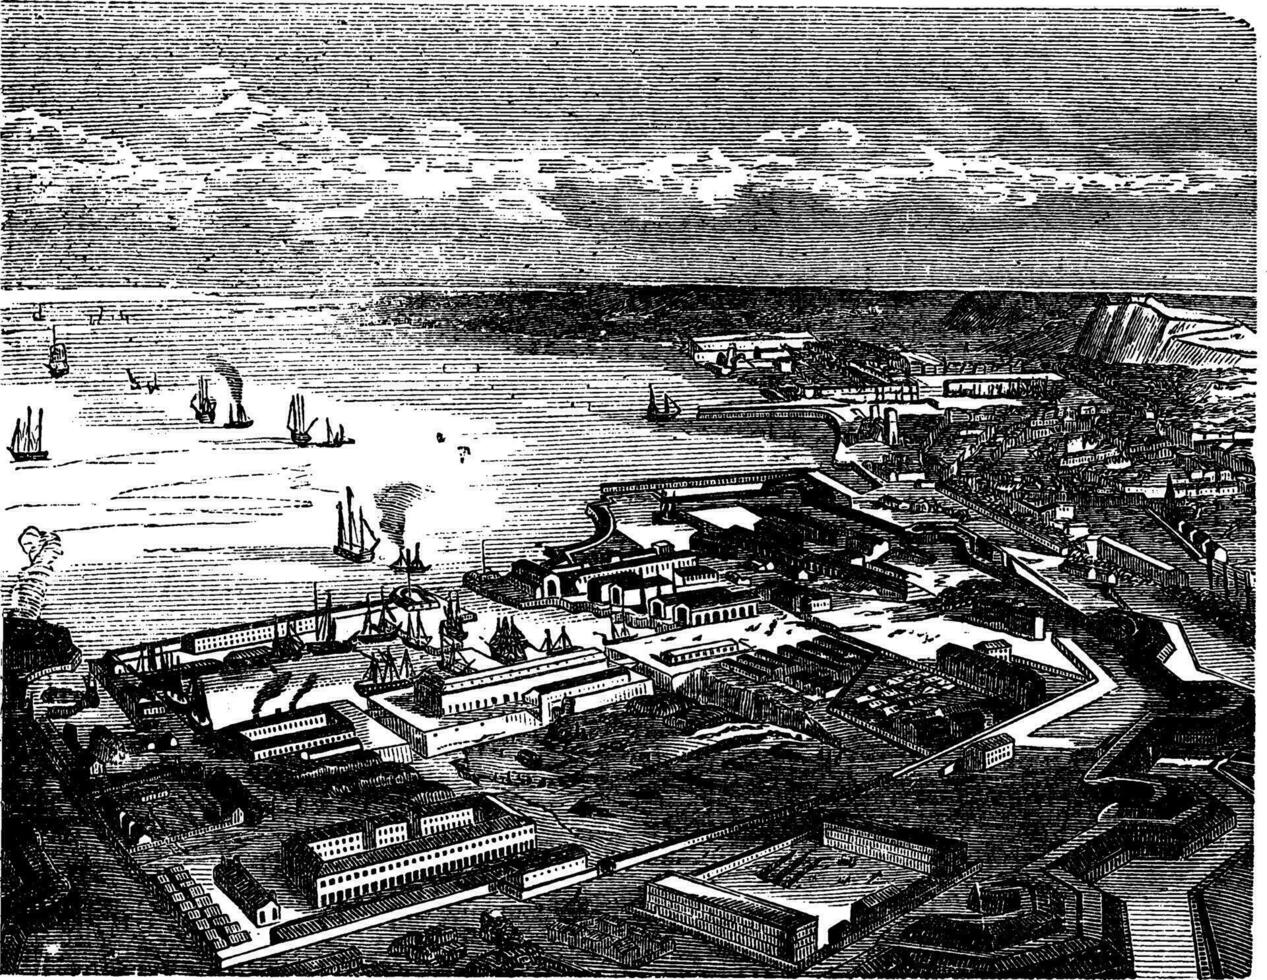 Cherbourg-Octeville, in Normandy, France, during the 1890s, vintage engraving vector